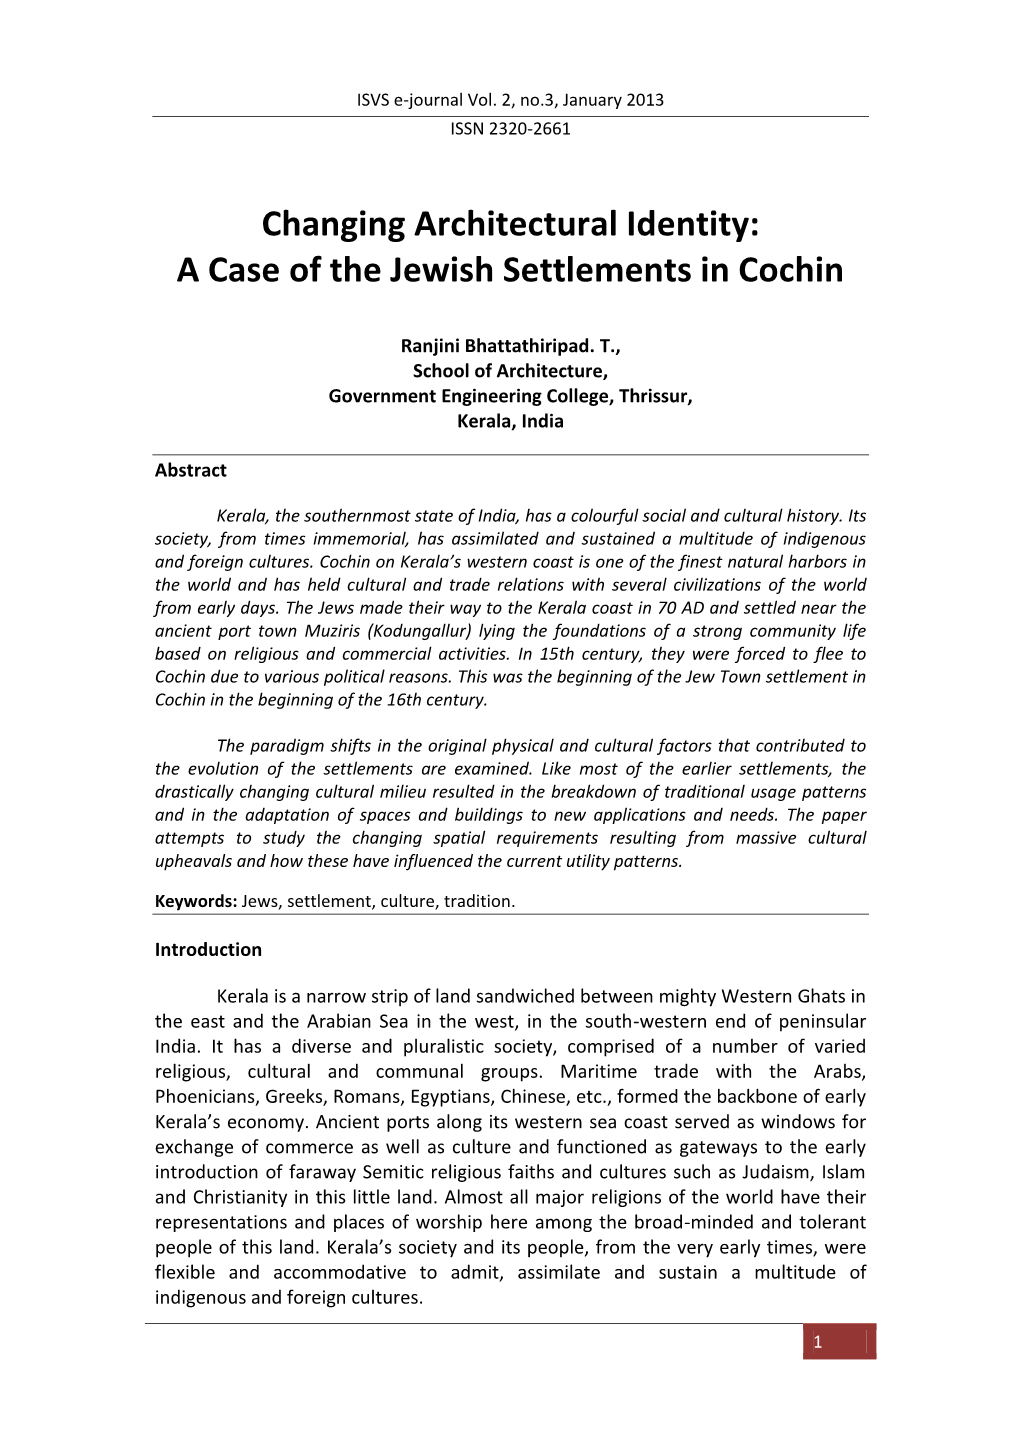 Changing Architectural Identity: a Case of the Jewish Settlements in Cochin